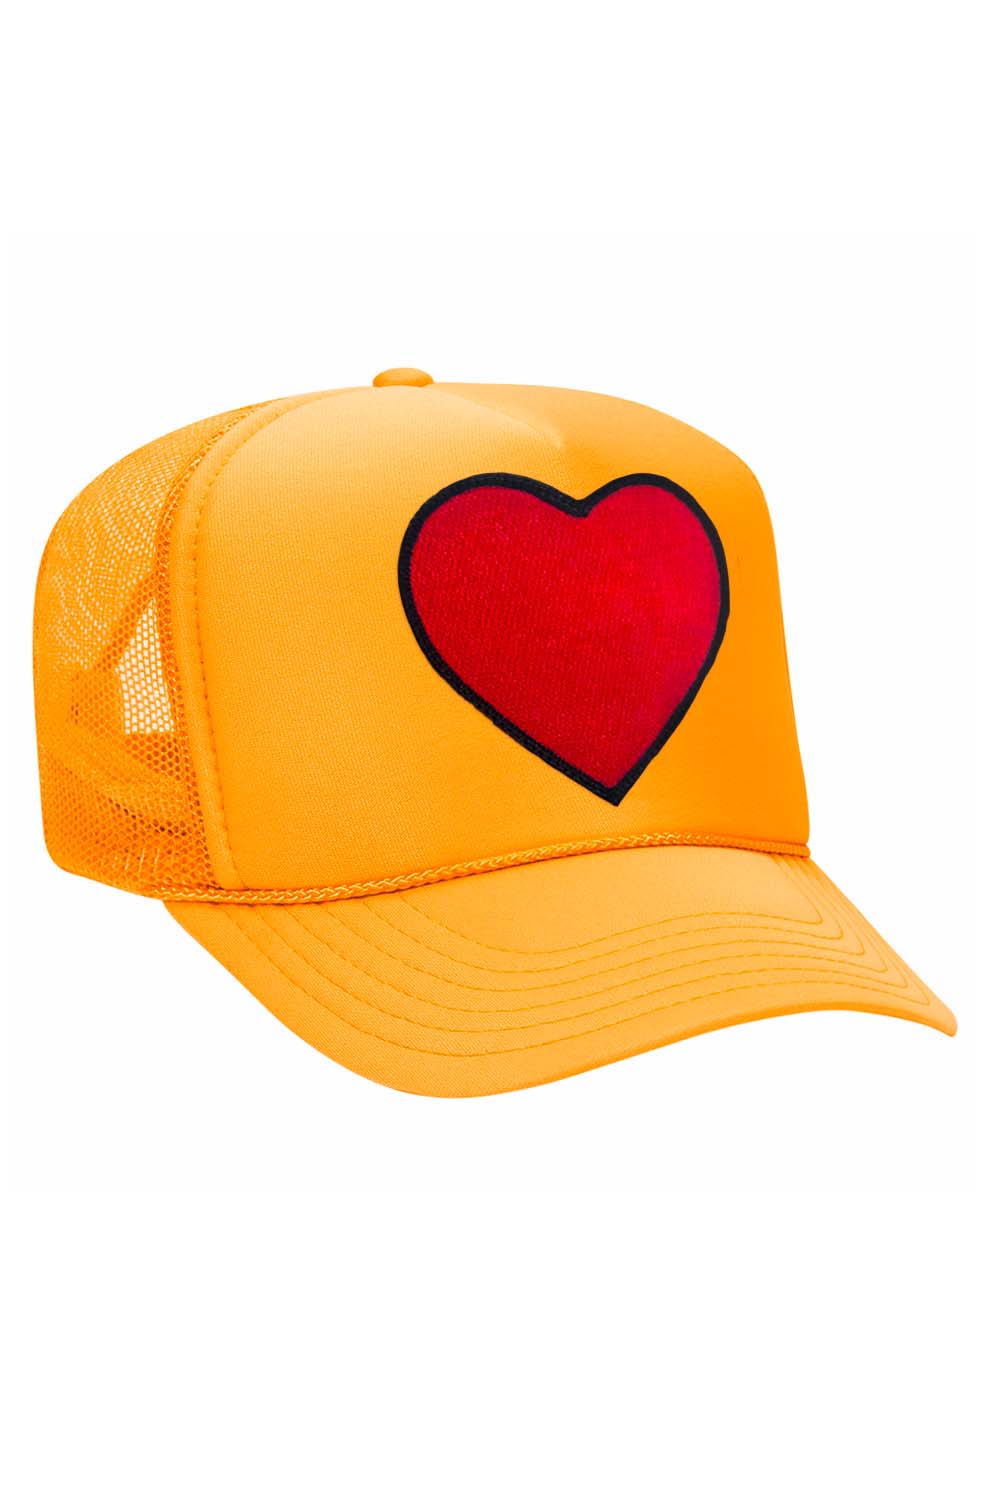 HEART - VINTAGE LOW RISE TRUCKER HATS Aviator Nation GOLD 